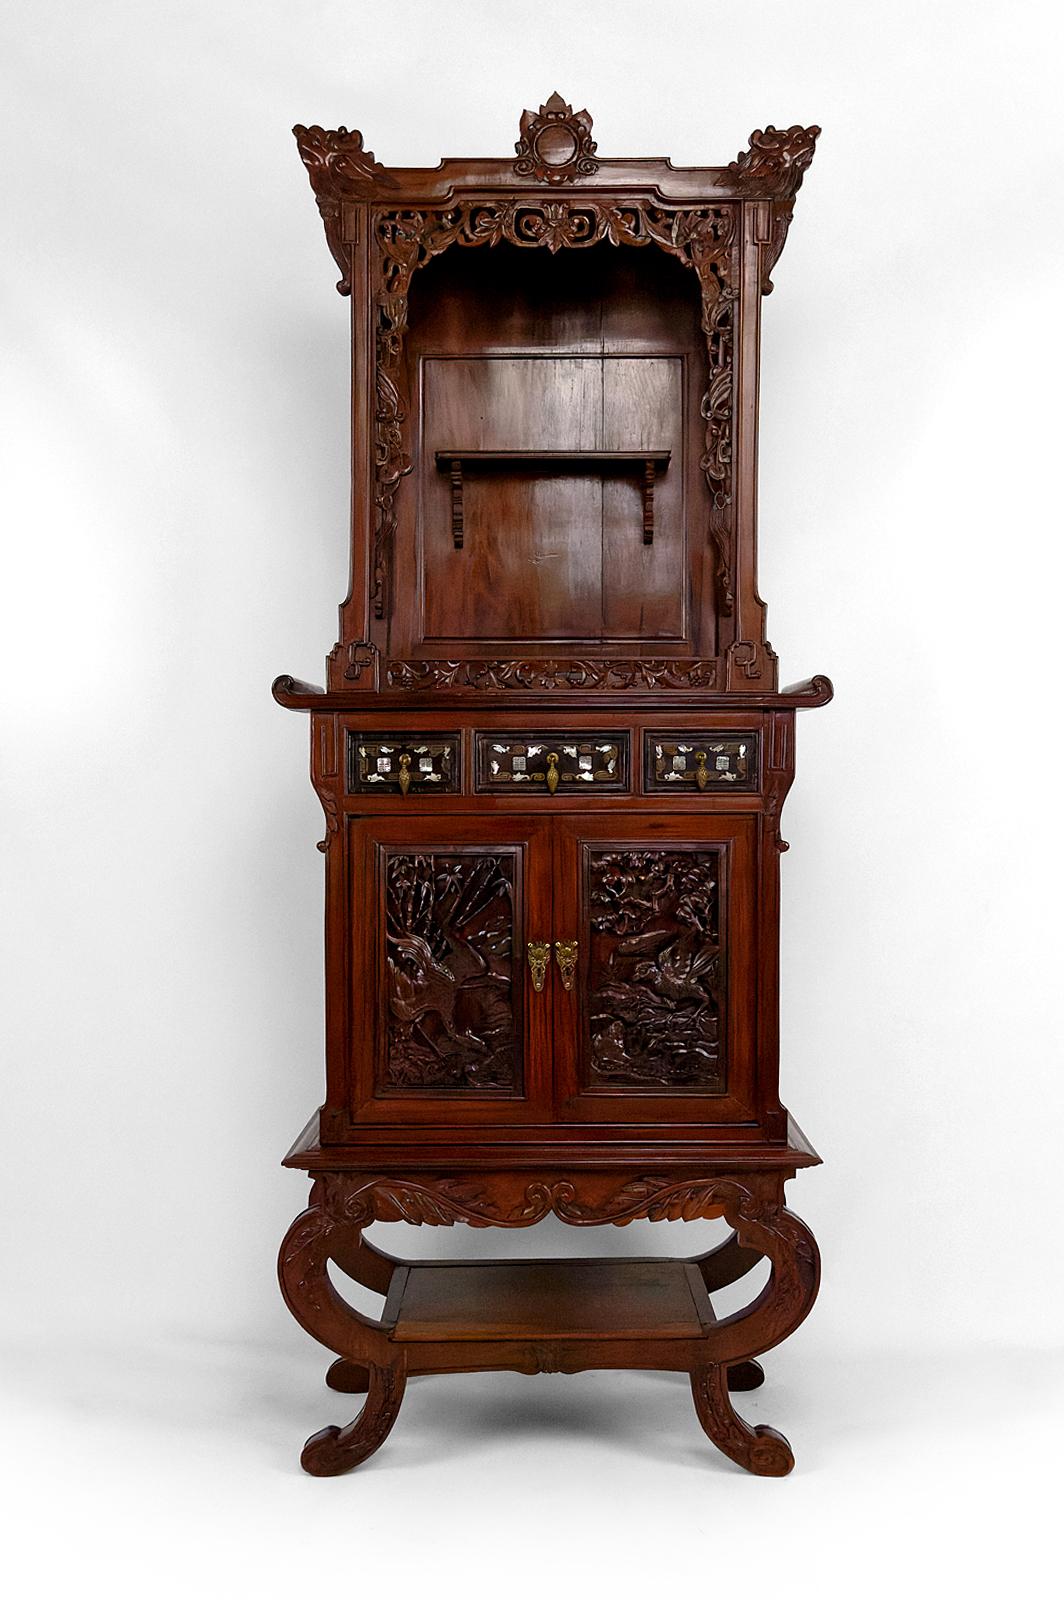 Important Asian Cabinet in carved wood, Vietnam or China, Circa 1880

Superb Asian Cabinet in carved Chinese mahogany (toona sinensis) and inlaid wood.

Carved with plant and animal motifs: 2 bats facing each other holding coins (symbol of good